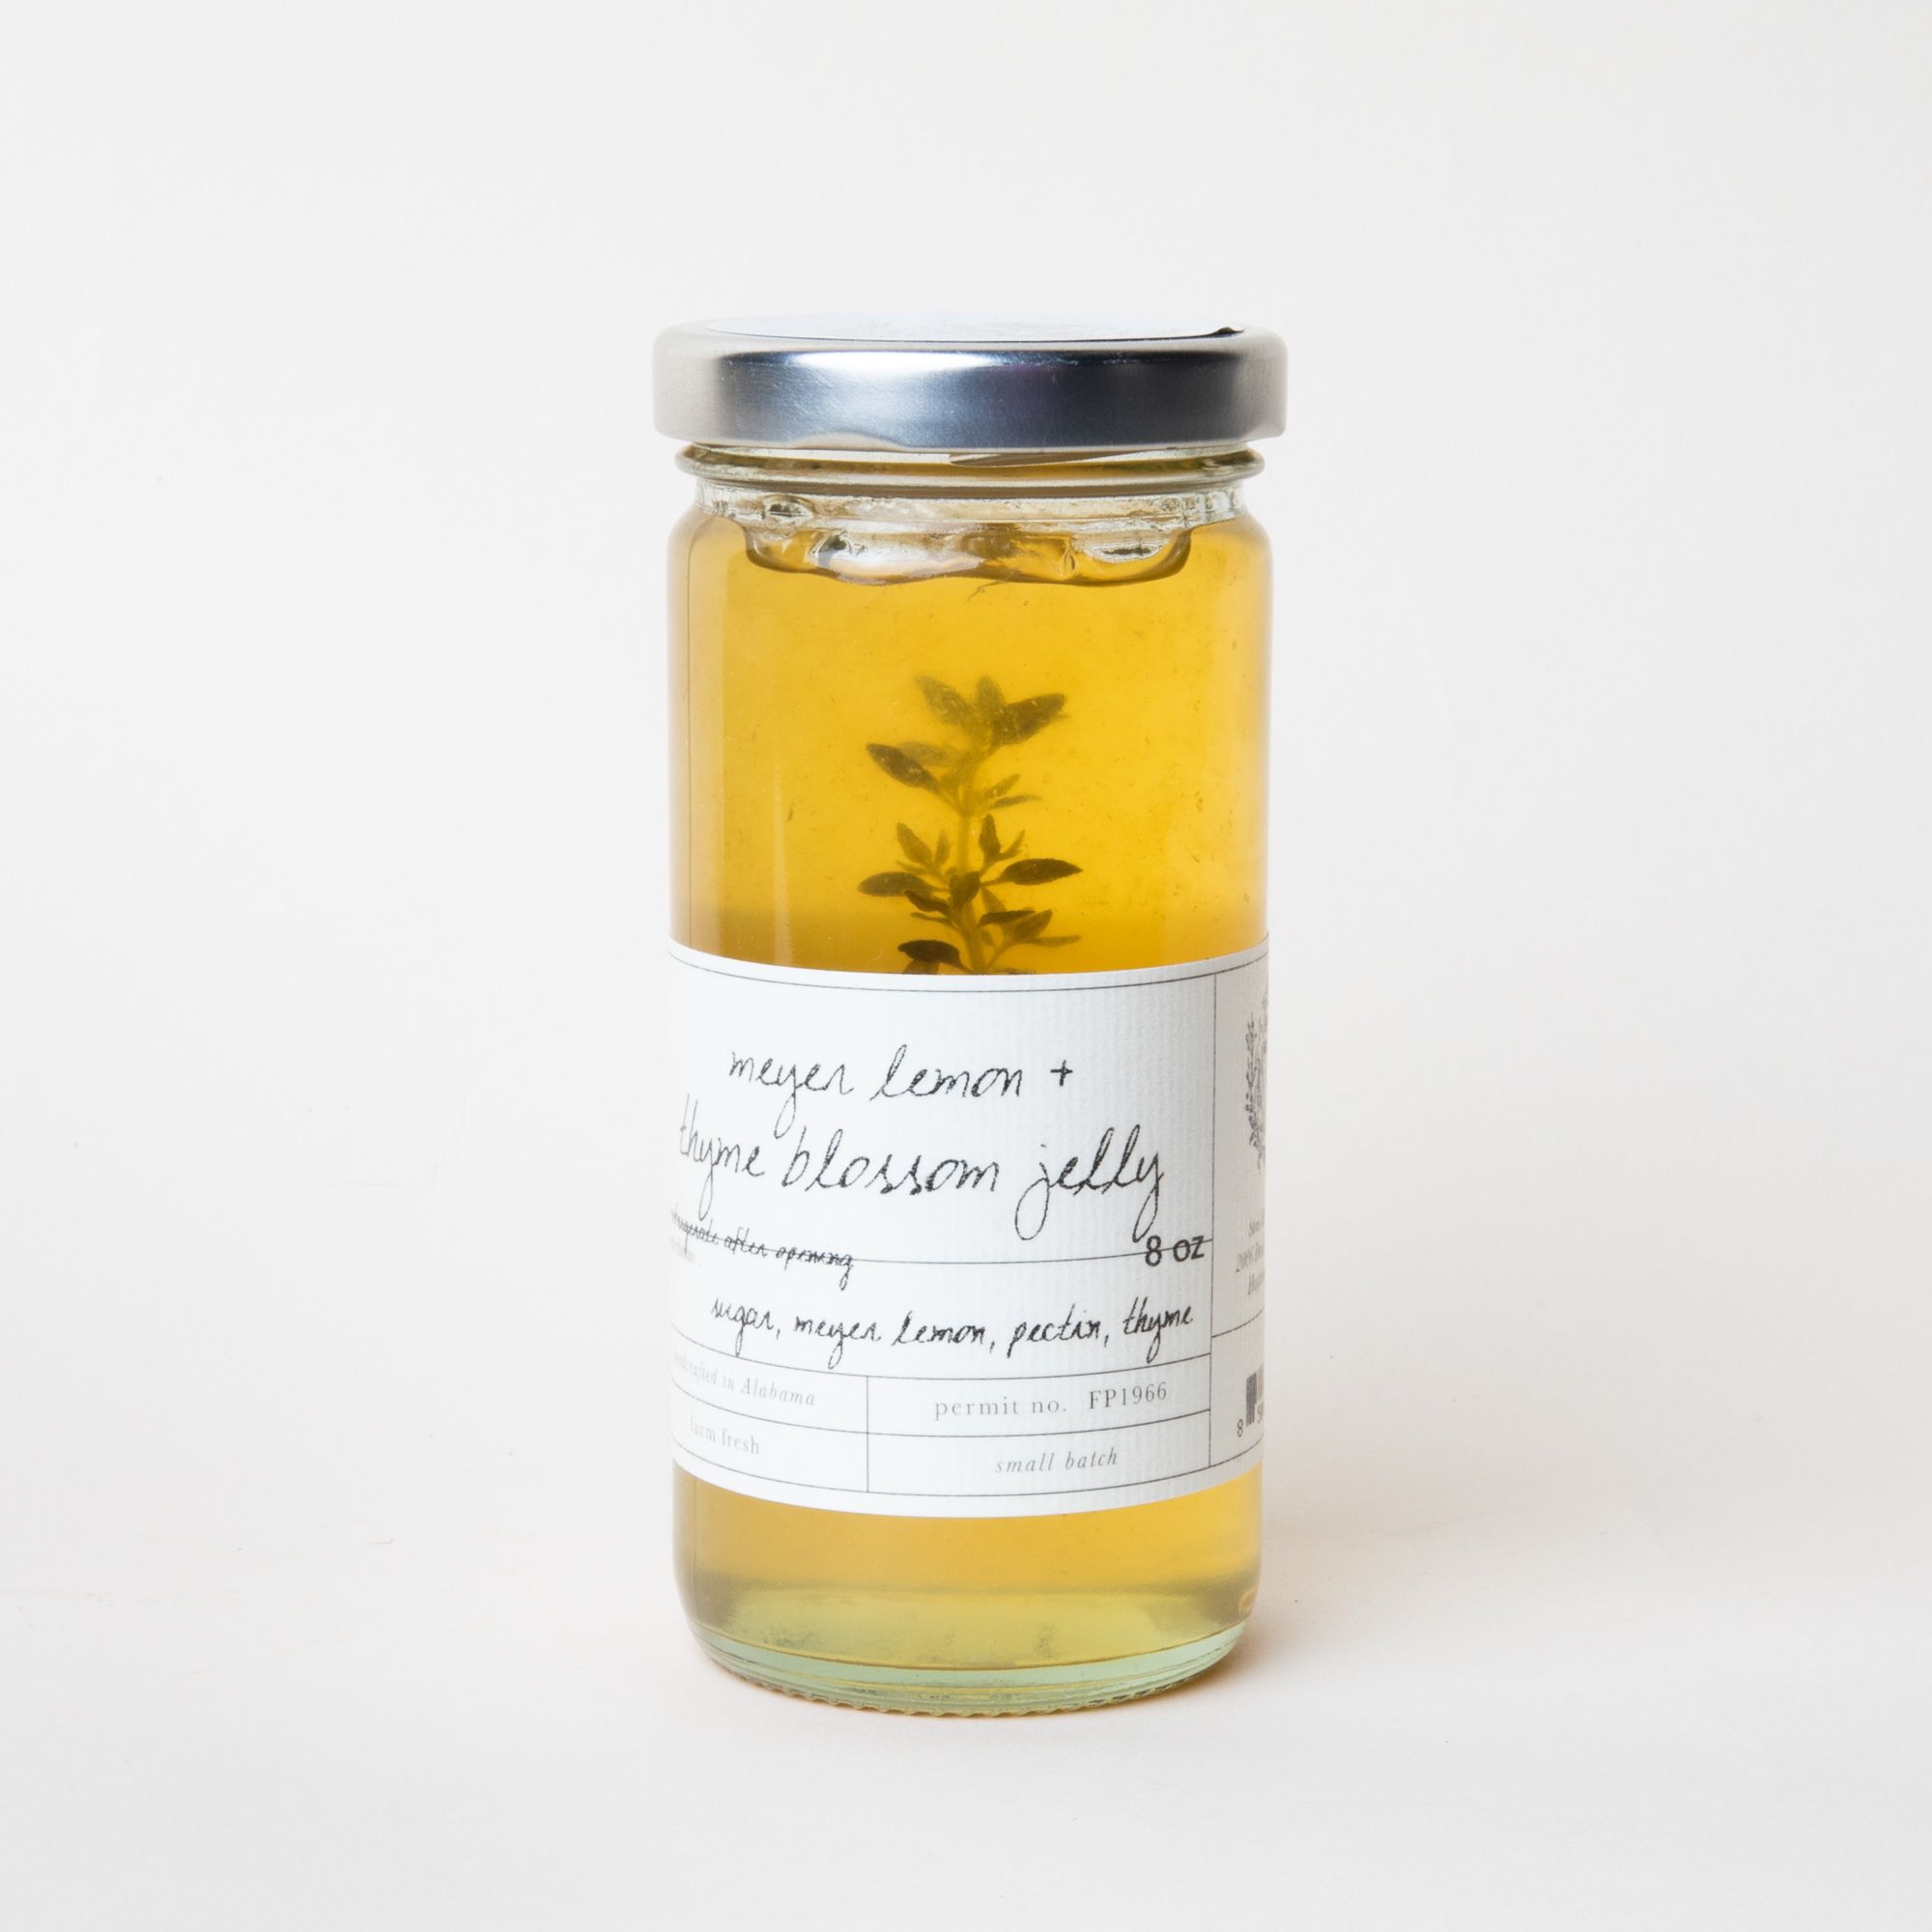 Tall glass jar filled with yellow jelly with a white label that reads "Meyer Lemon and Thyme Blossom Jelly"